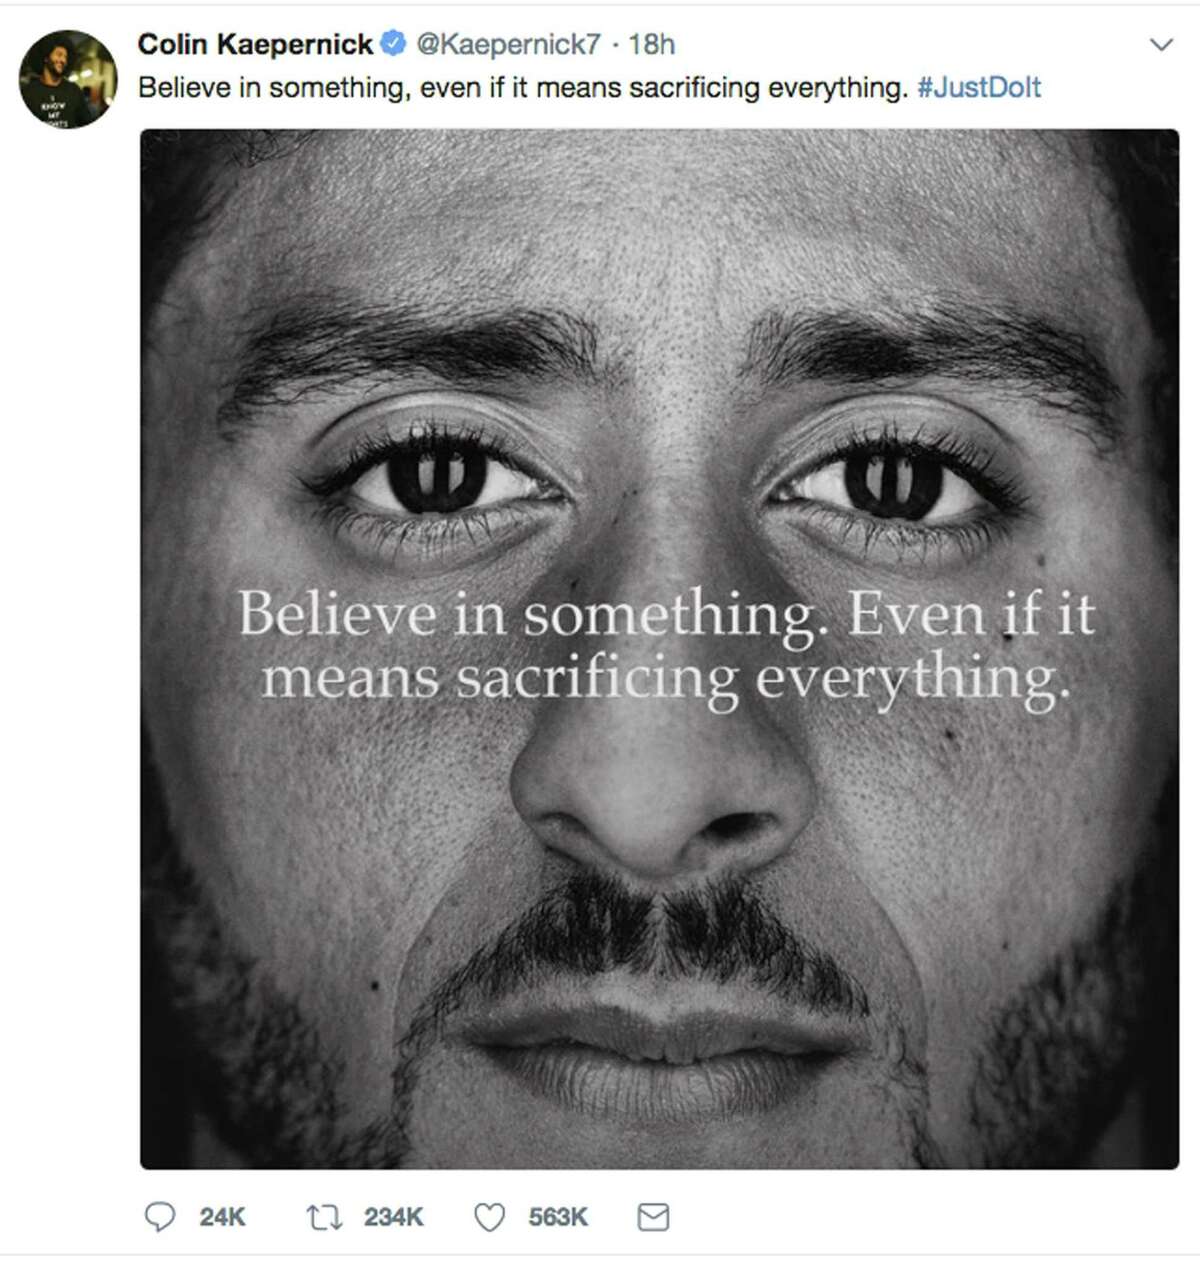 This image taken from the Twitter account of former NFL player Colin Kaepernick shows a Nike advertisement featuring him that was posted on Sept. 3. Kaepernick already had a deal with Nike that was set to expire, but it was renegotiated into a multi-year deal to make him one of the faces of Nike's 30th anniversary "Just Do It" campaign.